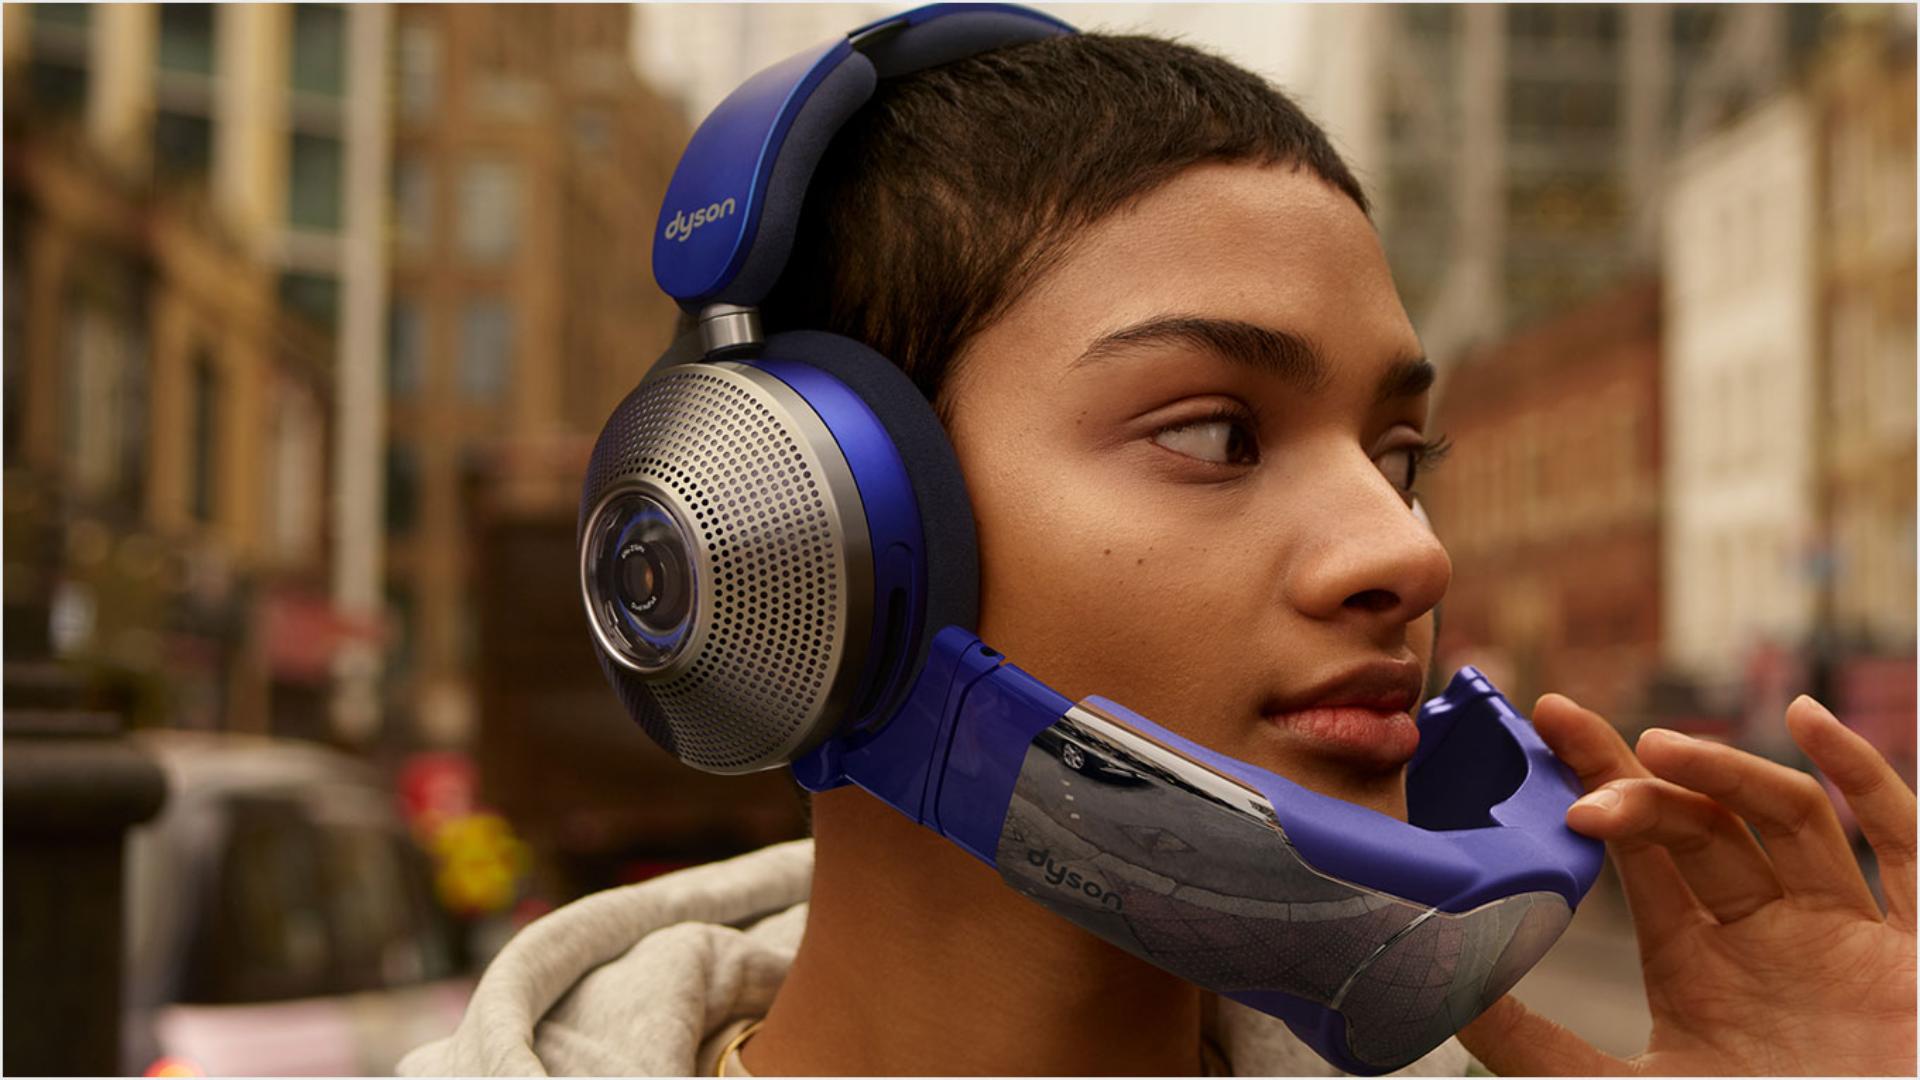 Woman wearing Dyson Zone headphones with air purification in Conversation mode with visor flipped down.